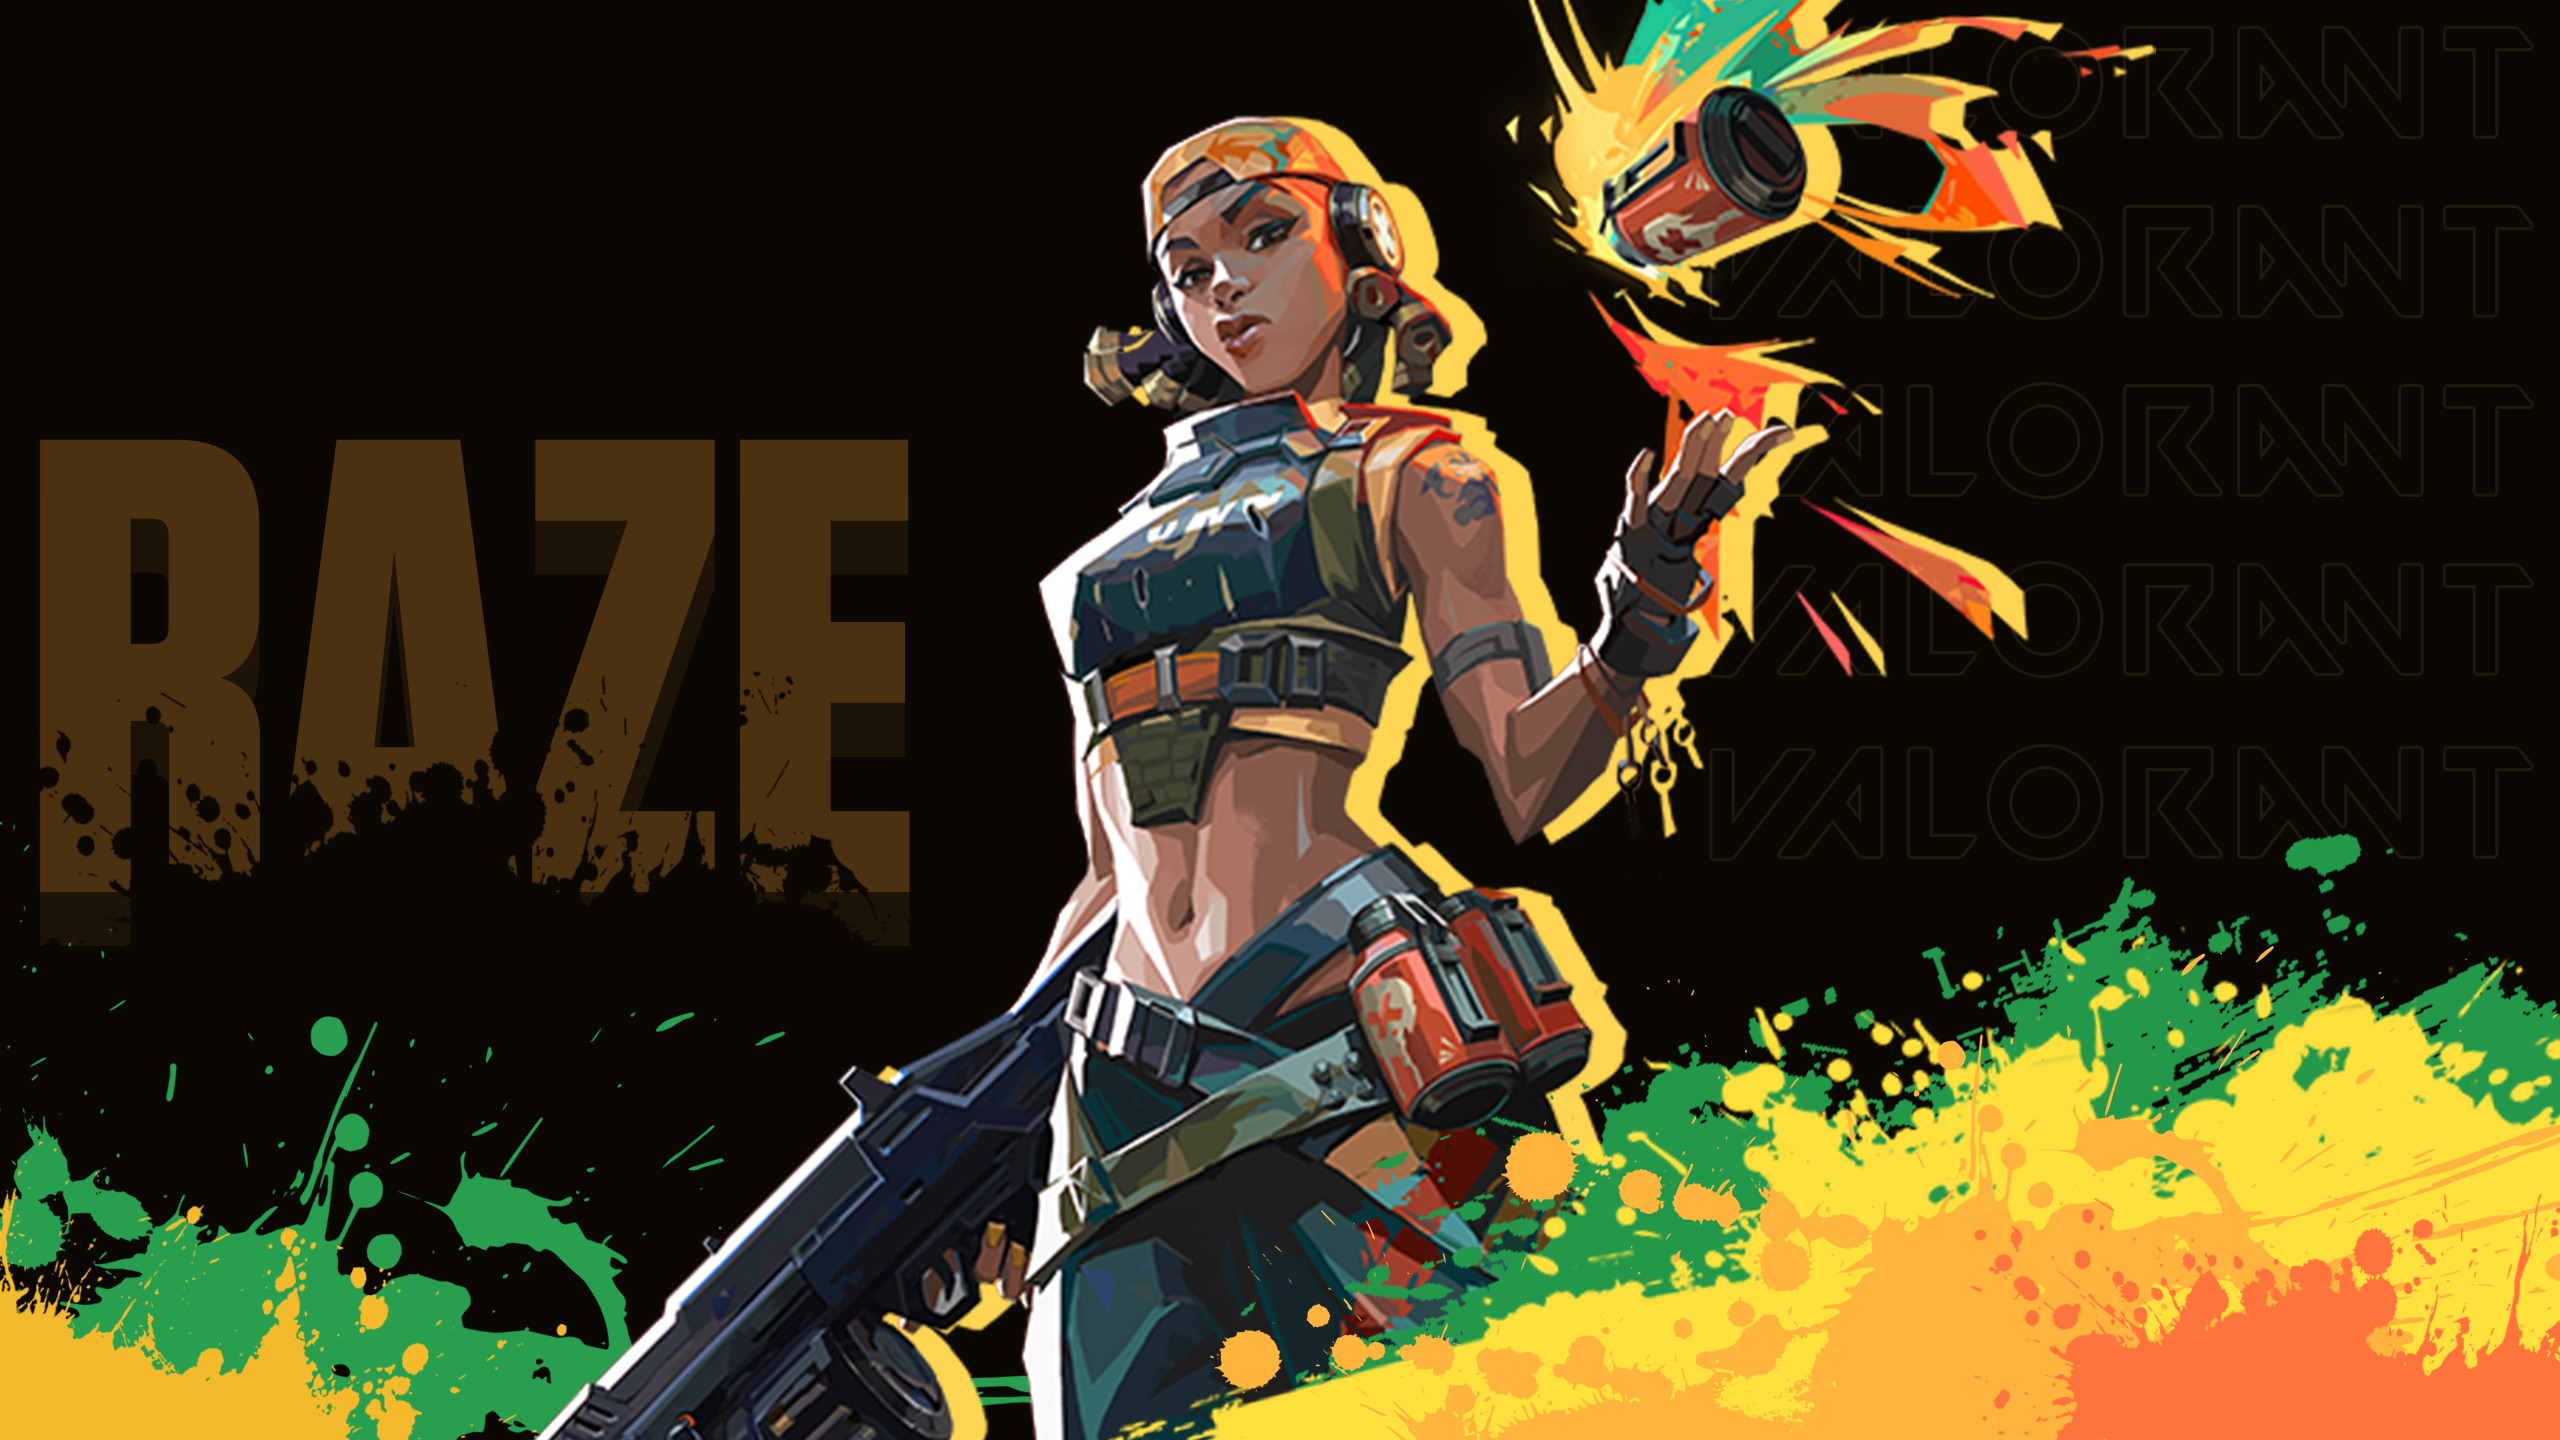 Raze Wallpaper. Available now in 2K! by pikaify_designs - Image Abyss